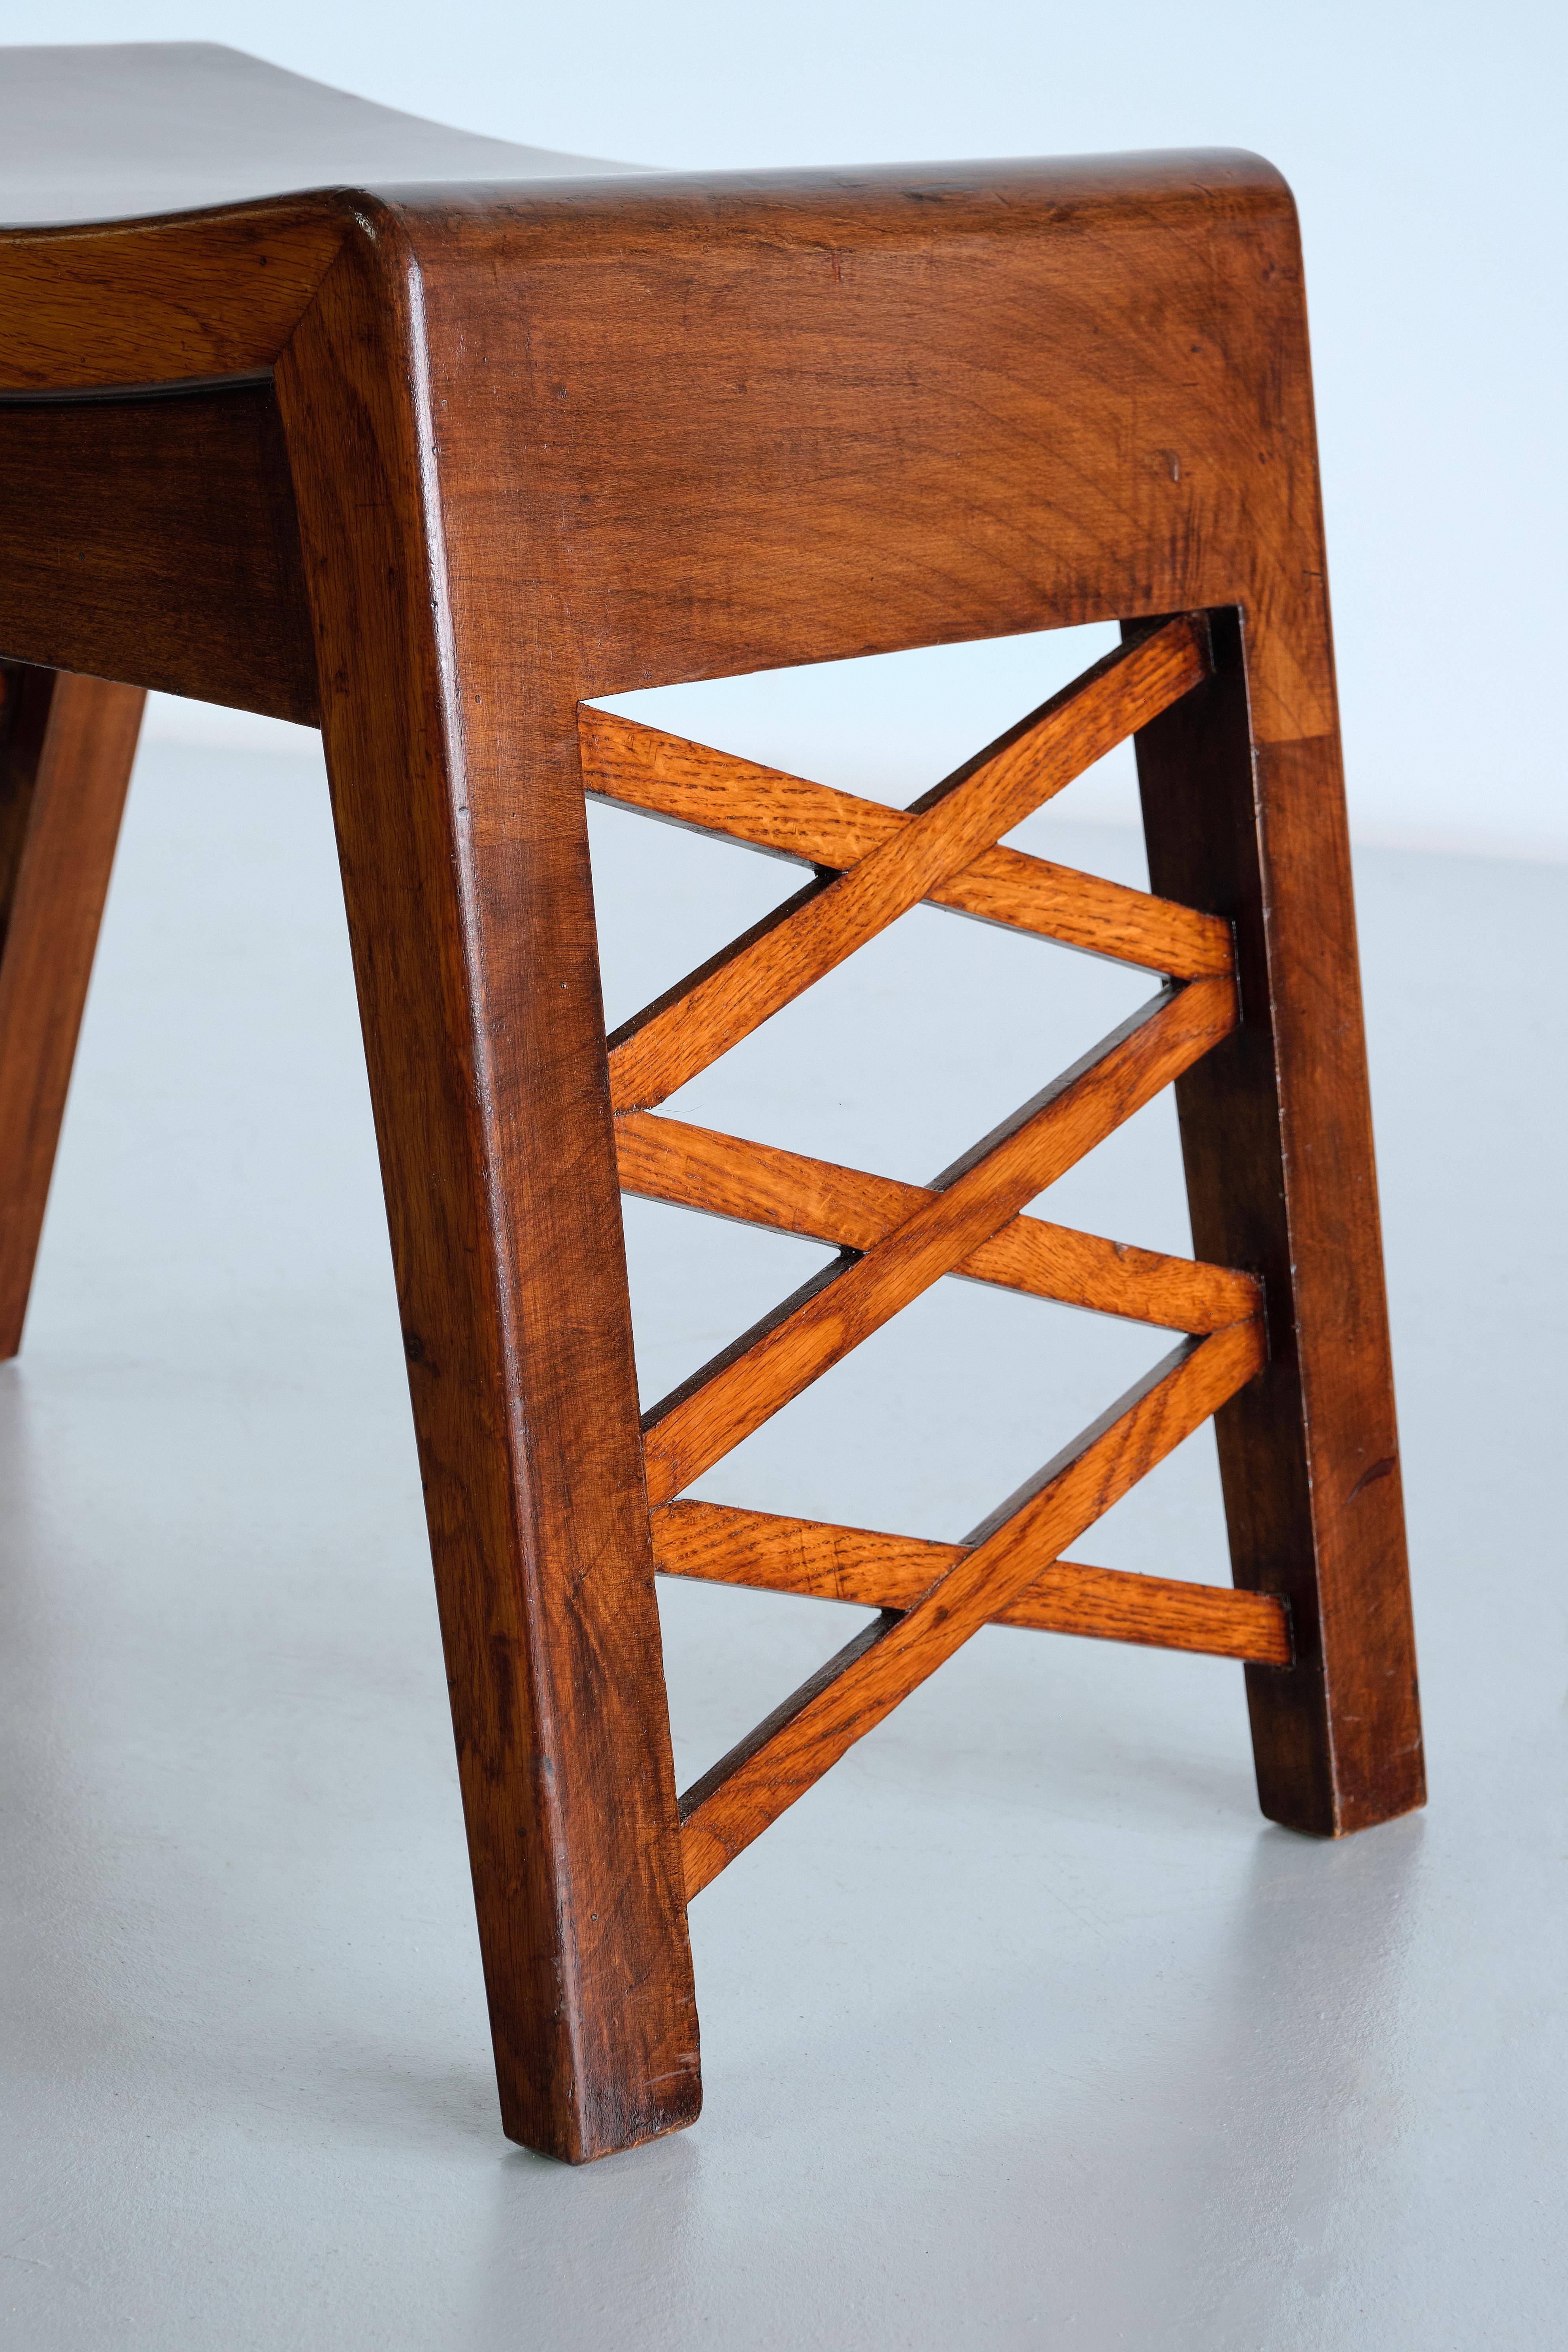 Piero Portaluppi Attributed Pair of Stools in Chestnut Wood, Italy, Late 1930s For Sale 3